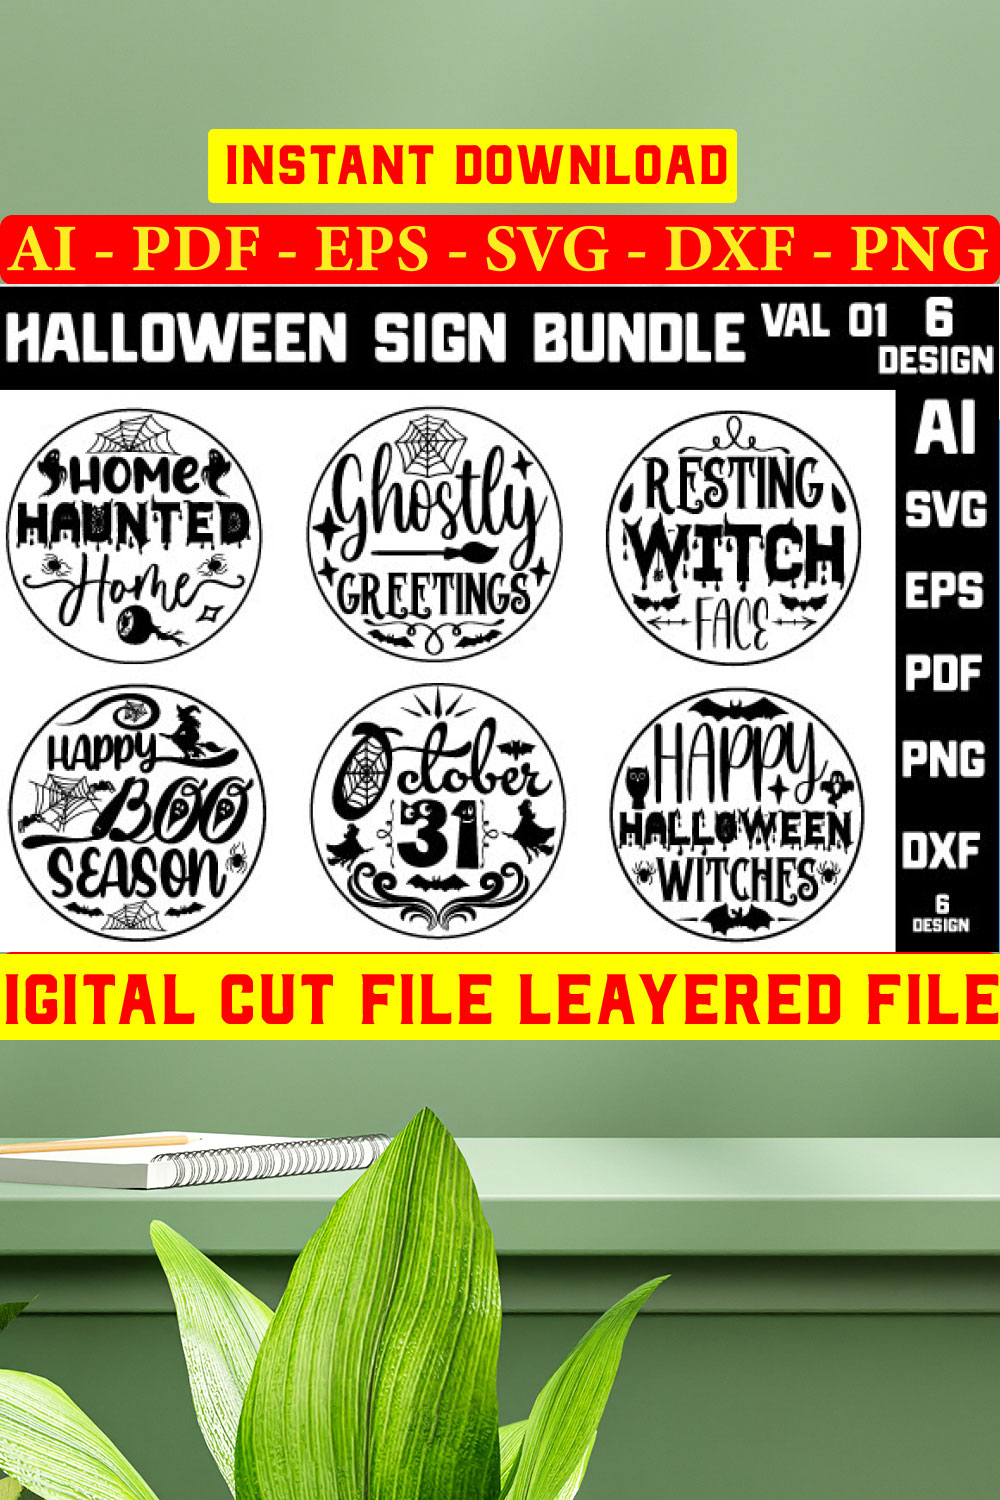 Halloween Sign Bundle Vol-1 Welcome to Halloween svg pinterest preview image.